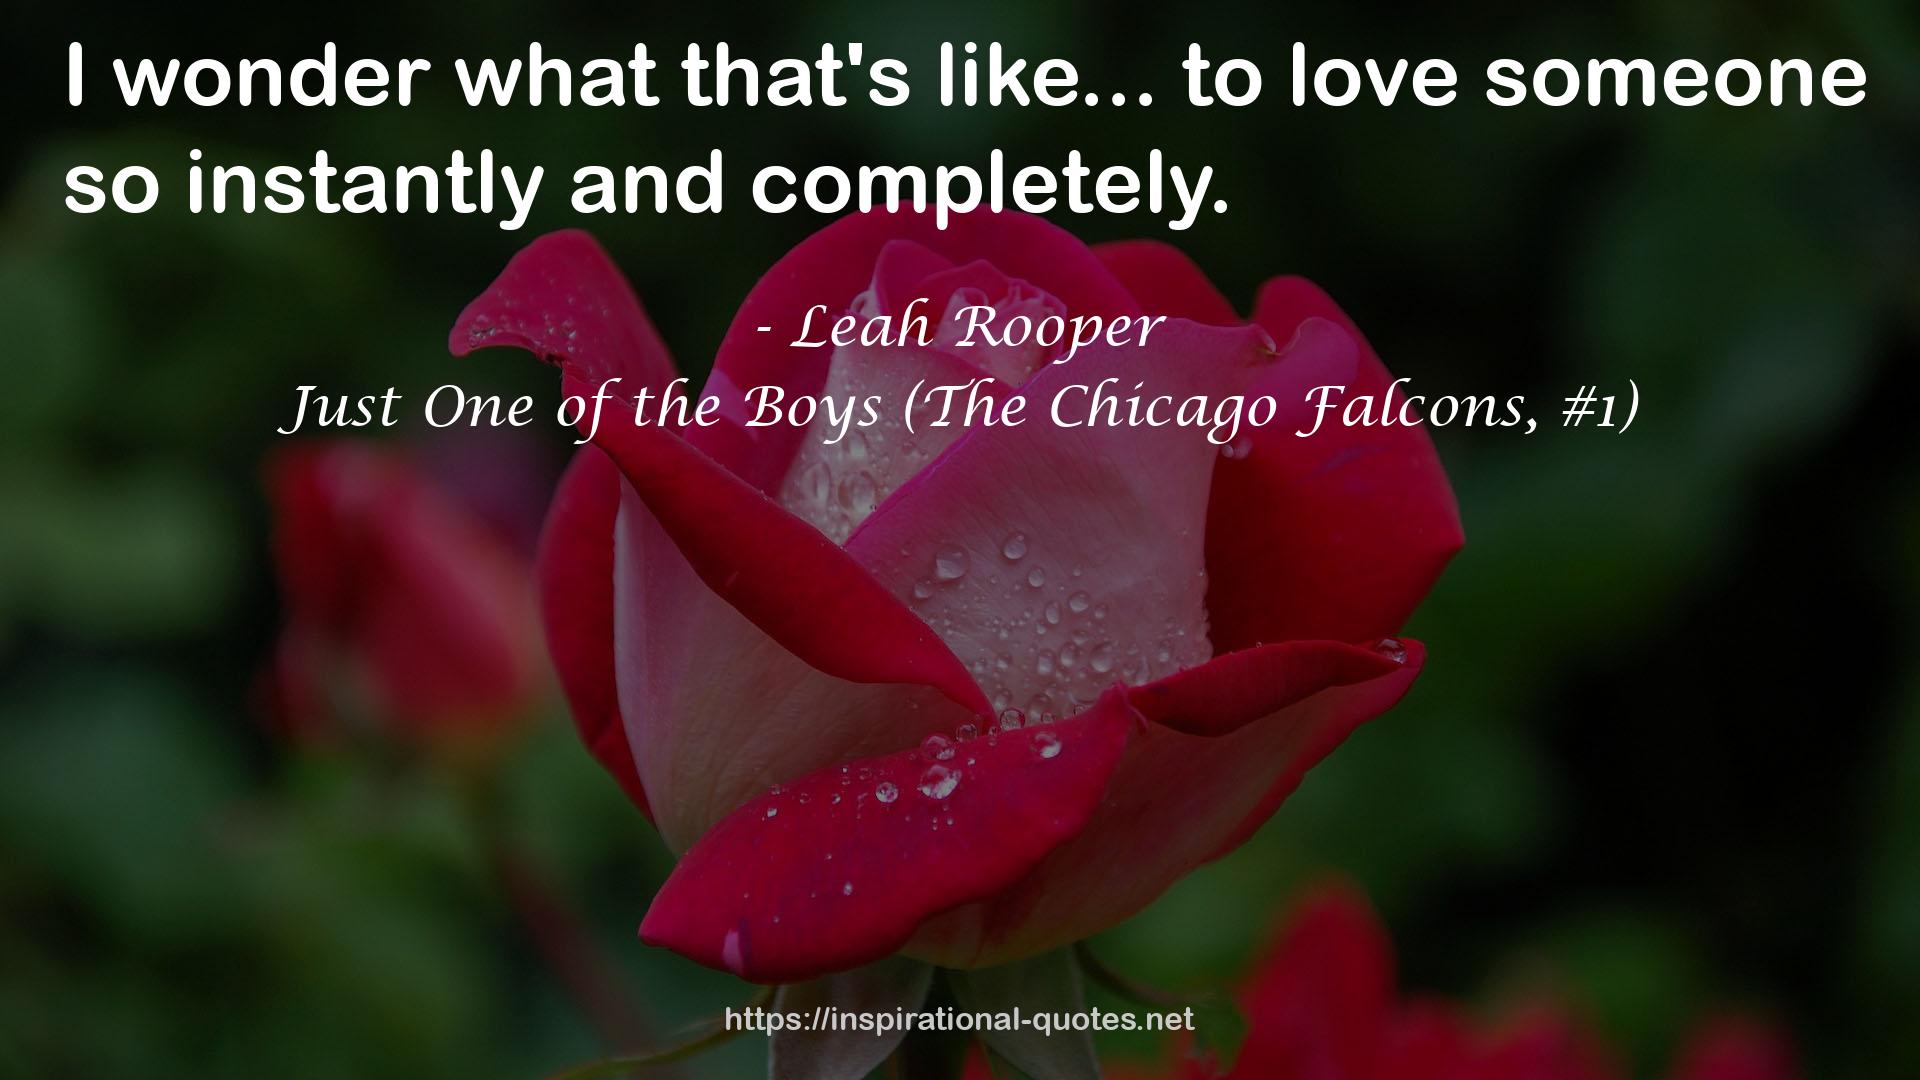 Just One of the Boys (The Chicago Falcons, #1) QUOTES